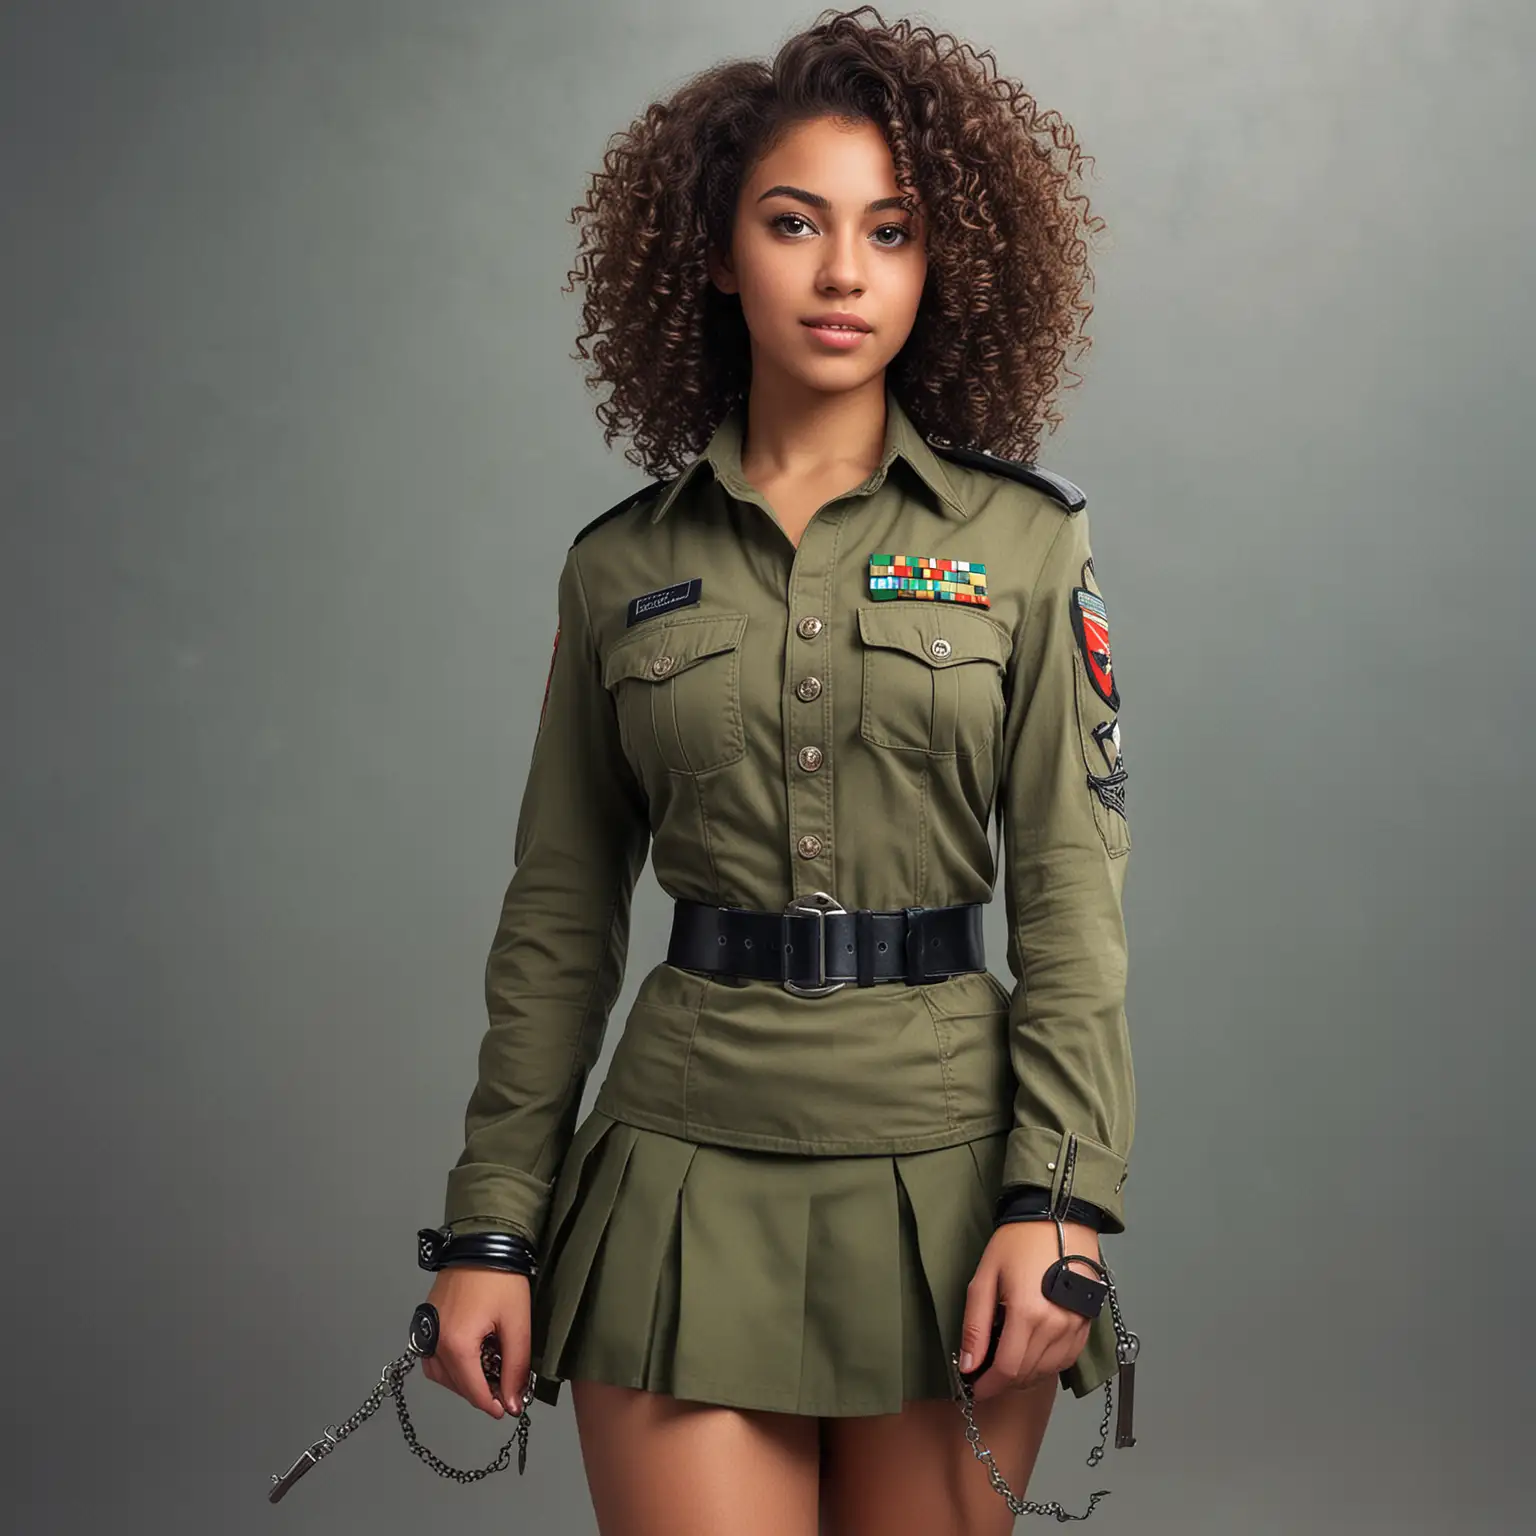 Military Giantess with Curly Hair Handcuffing People